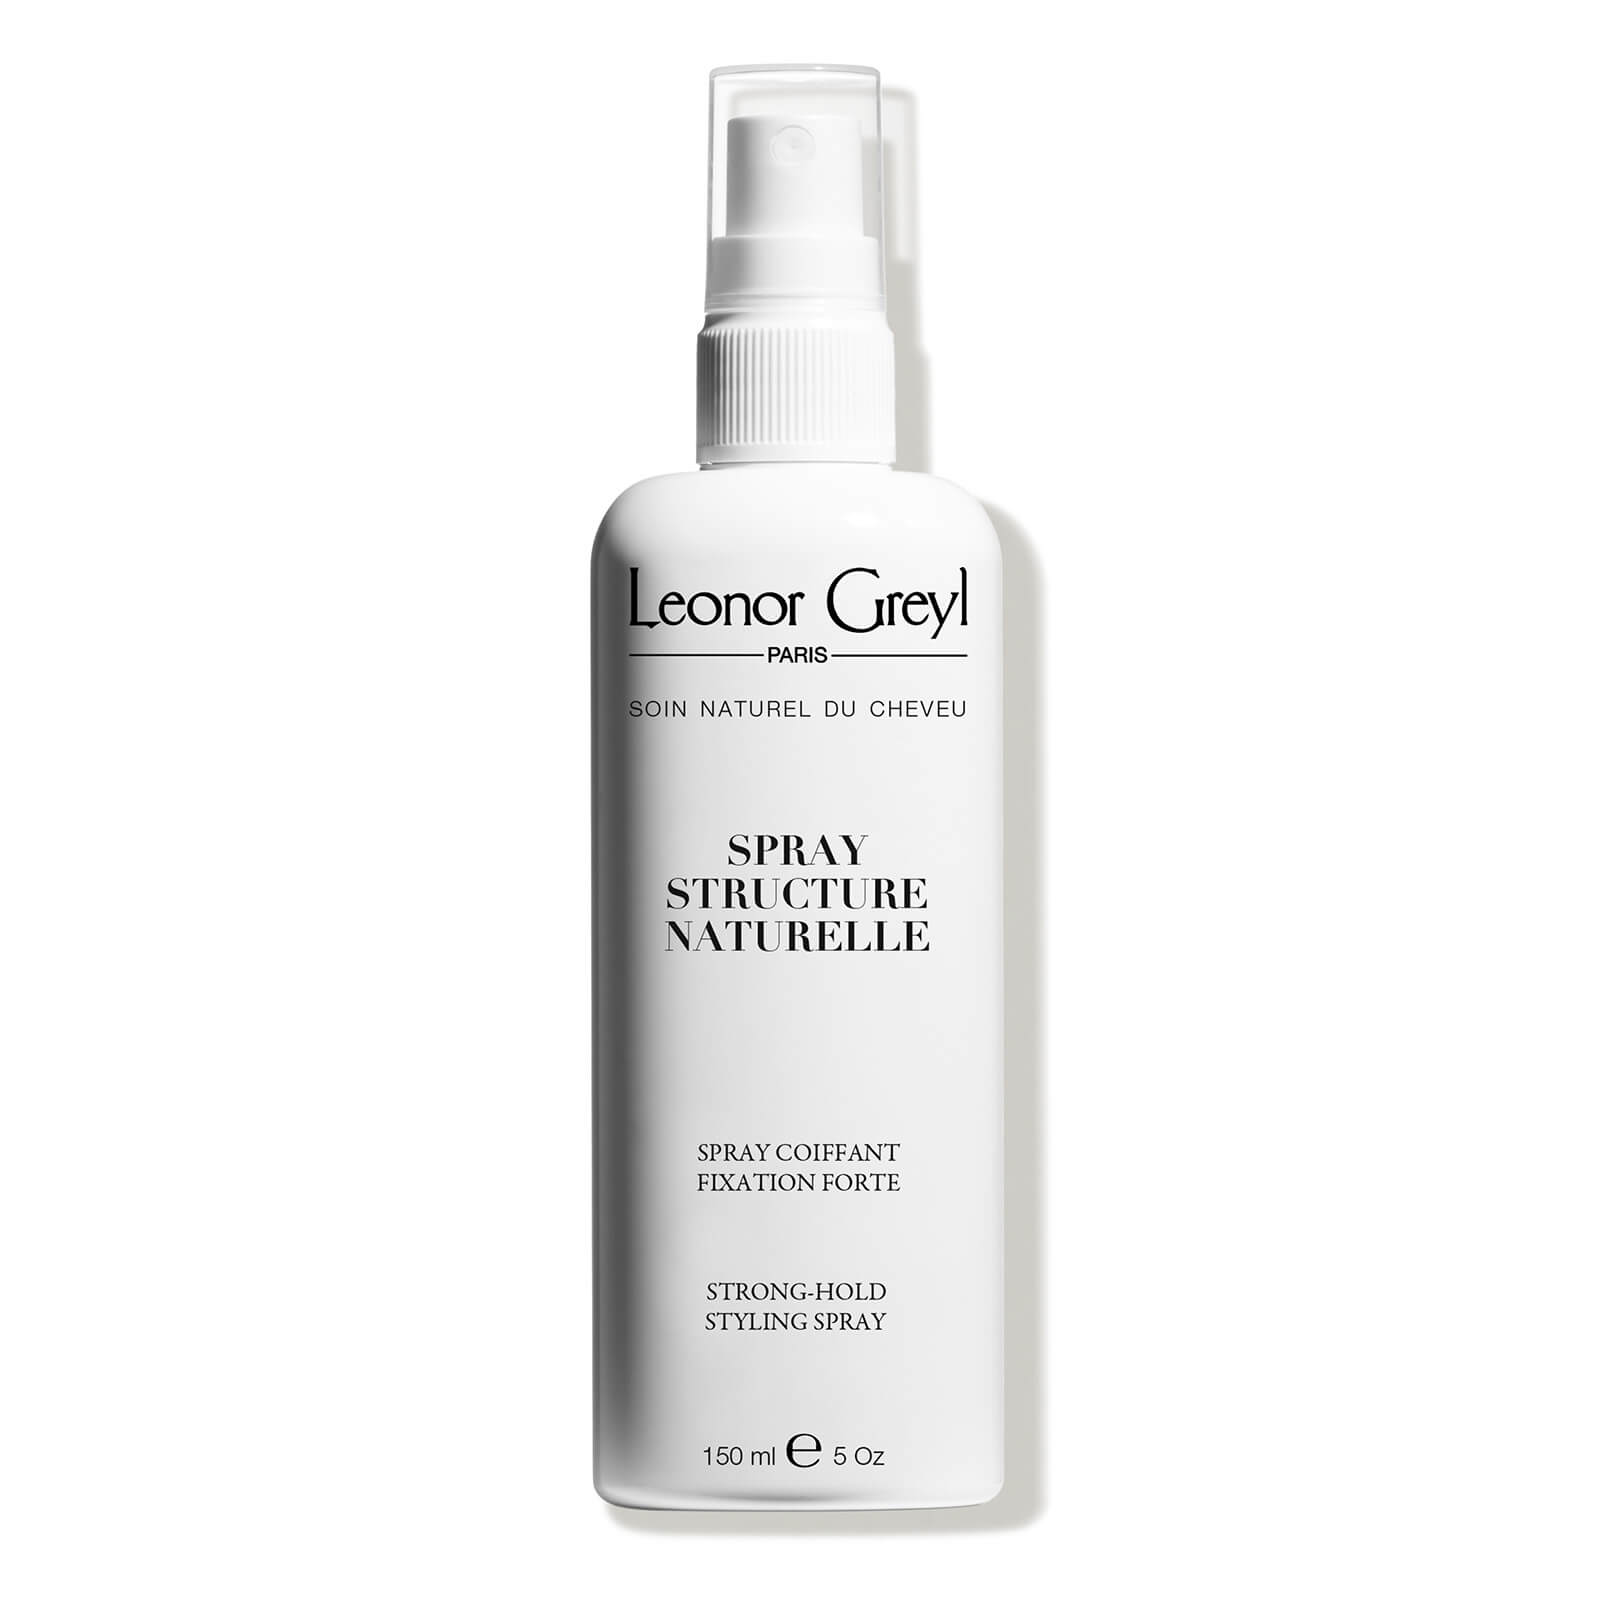 Leonor Greyl Structure Naturelle * (Strong Hold Spray) lookfantastic.com imagine